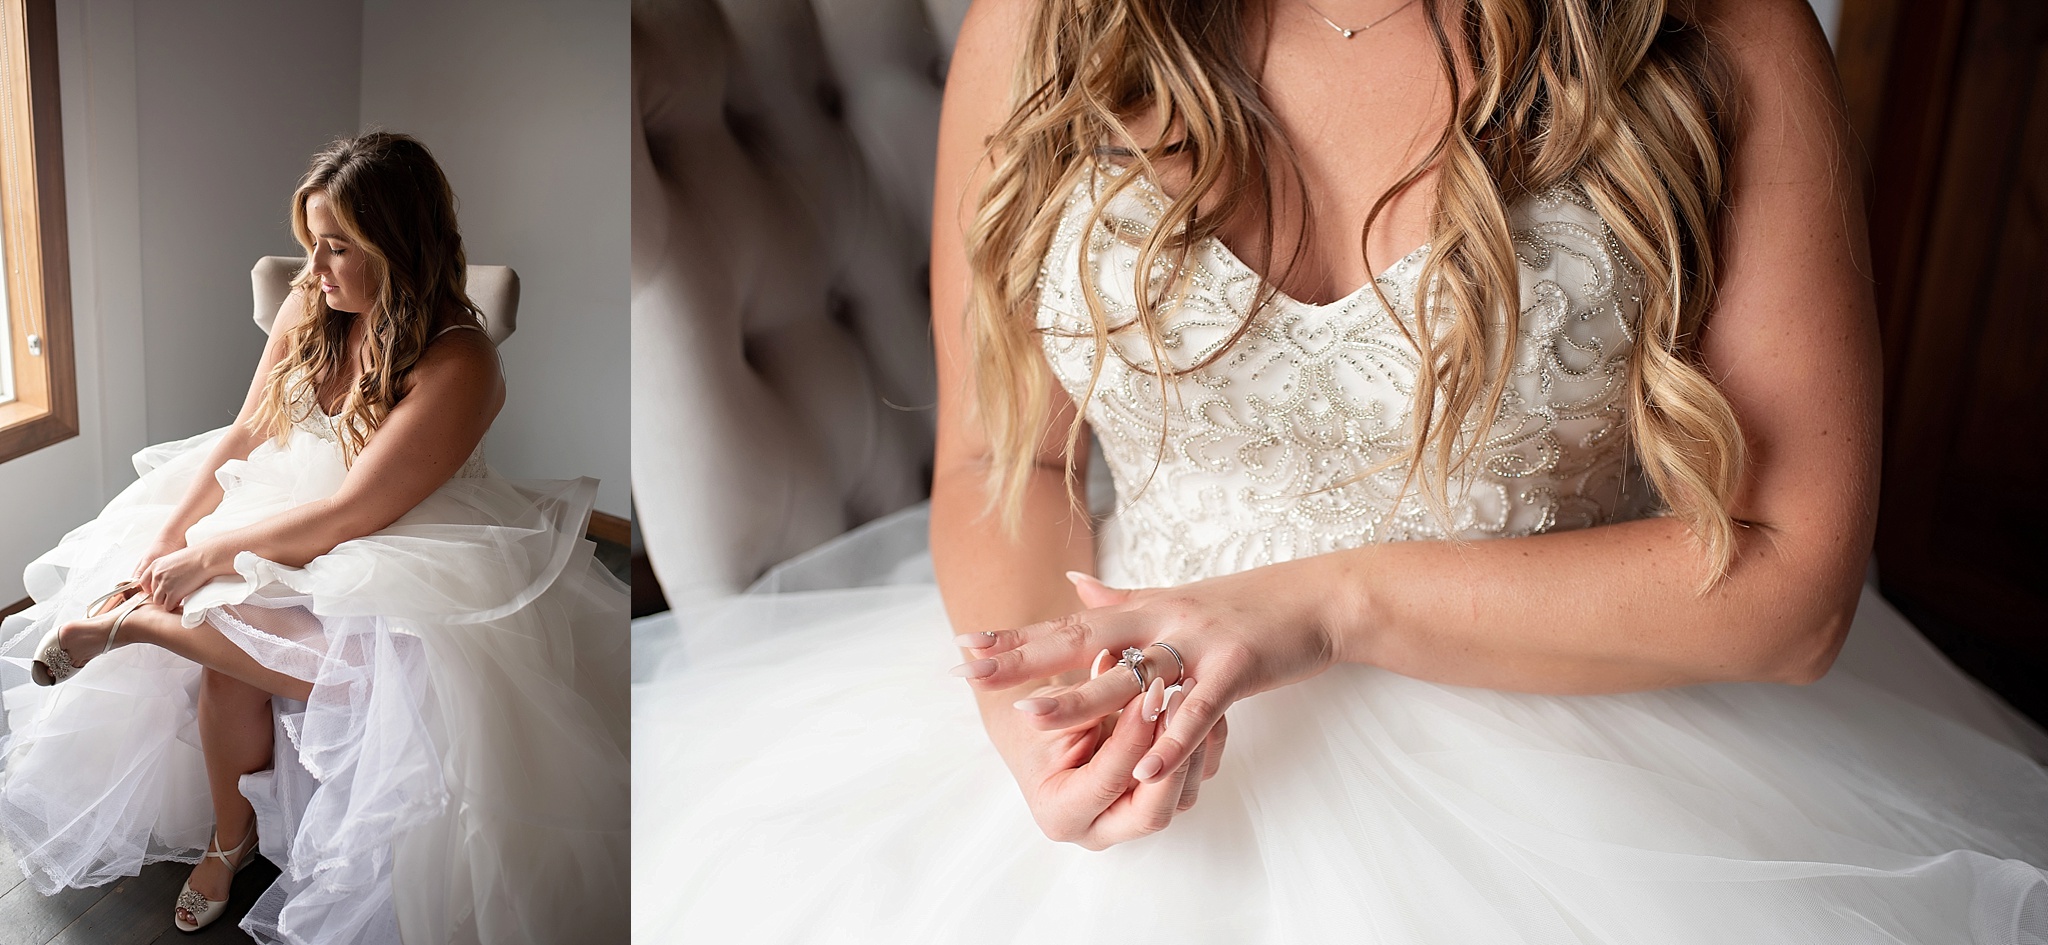 bride puts on her shoes and wedding ring set on her wedding day